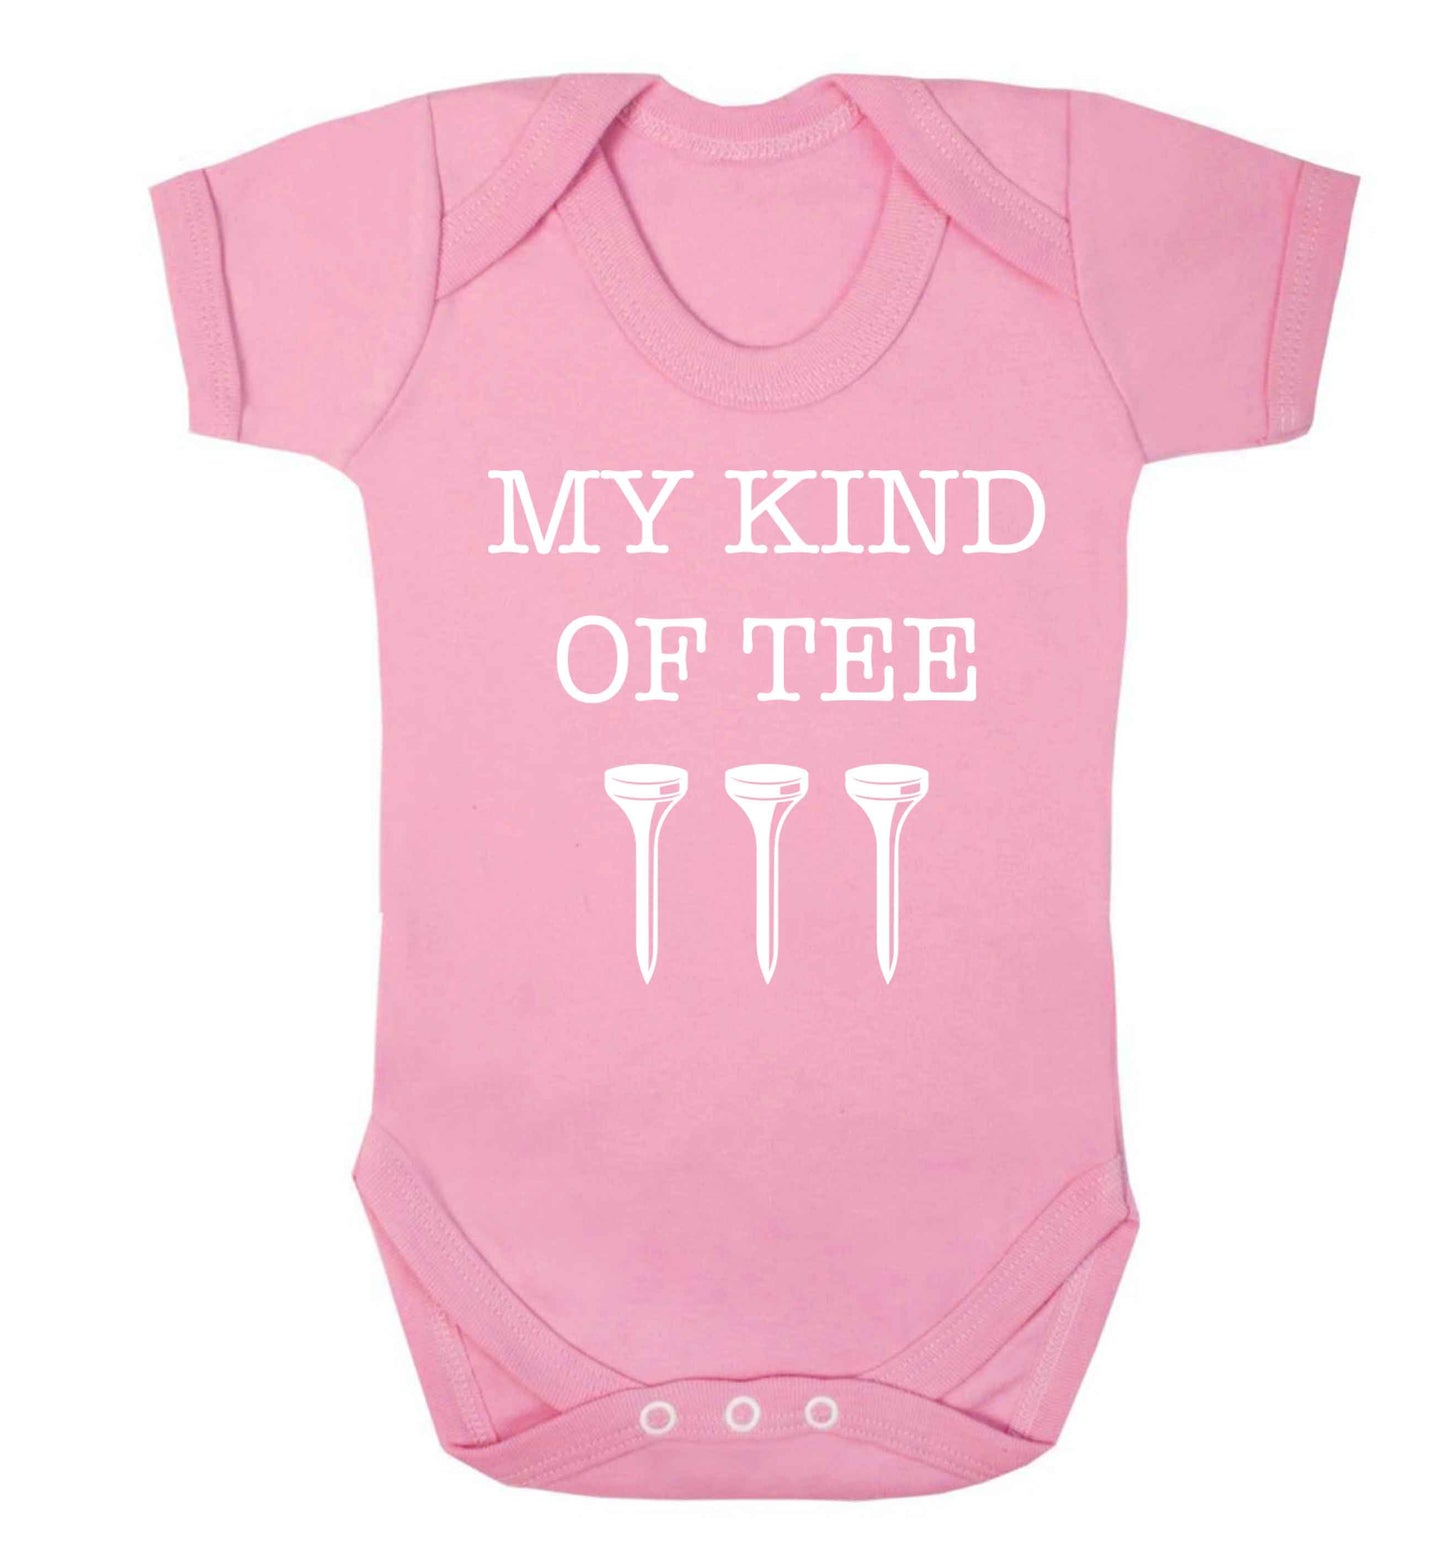 My kind of tee Baby Vest pale pink 18-24 months